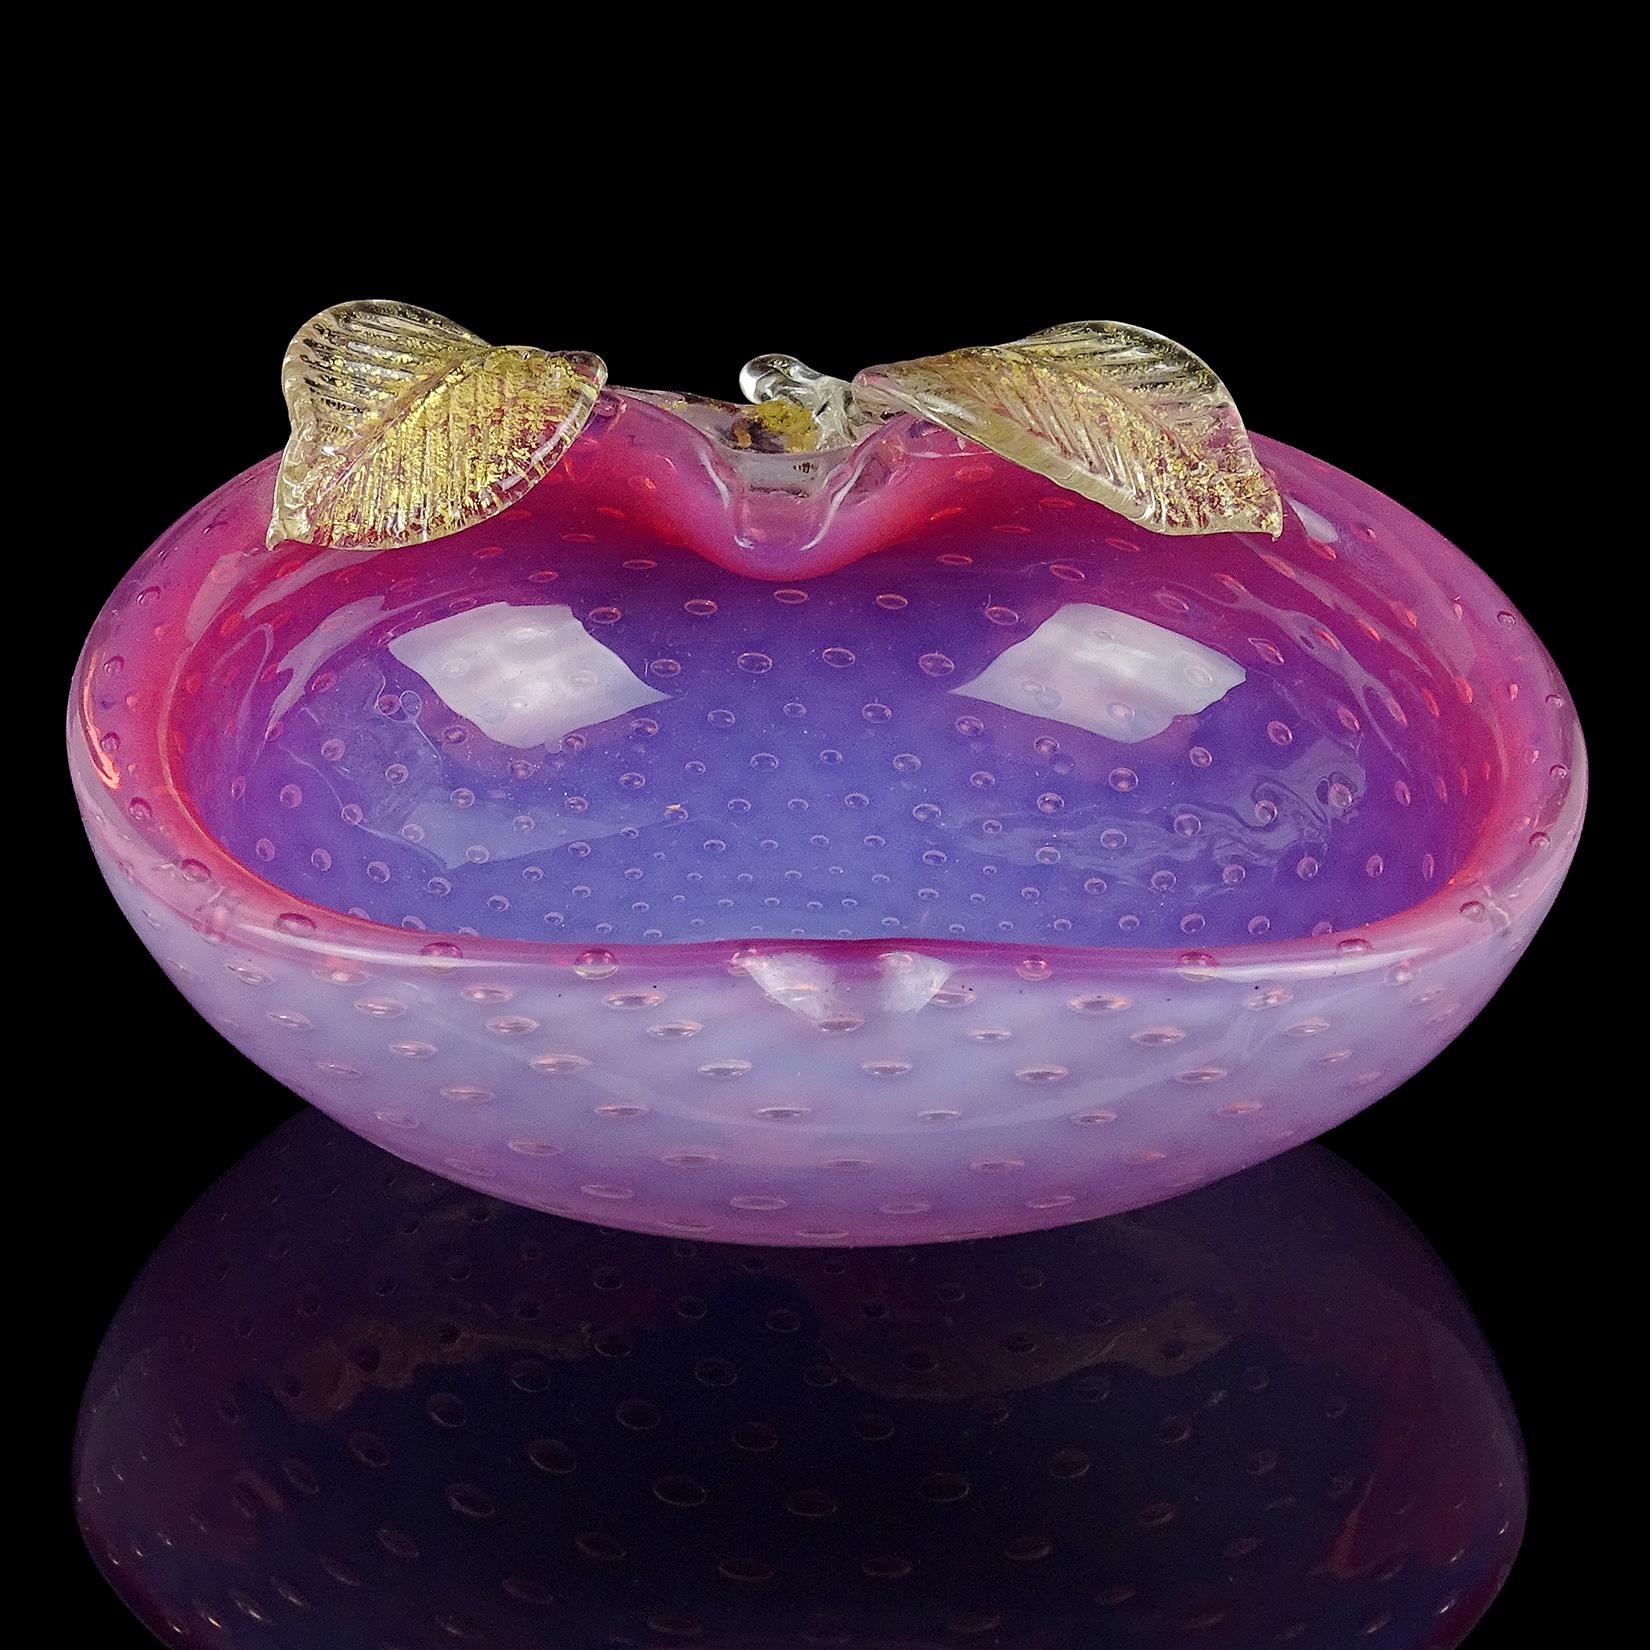 Beautiful vintage Murano hand blown opalescent white and pink, with gold flecks Italian art glass apple shaped decorative bowl or vide-poche. The piece is made in the Bullicante technique, with even bubbles throughout. It has leafs and stem attached